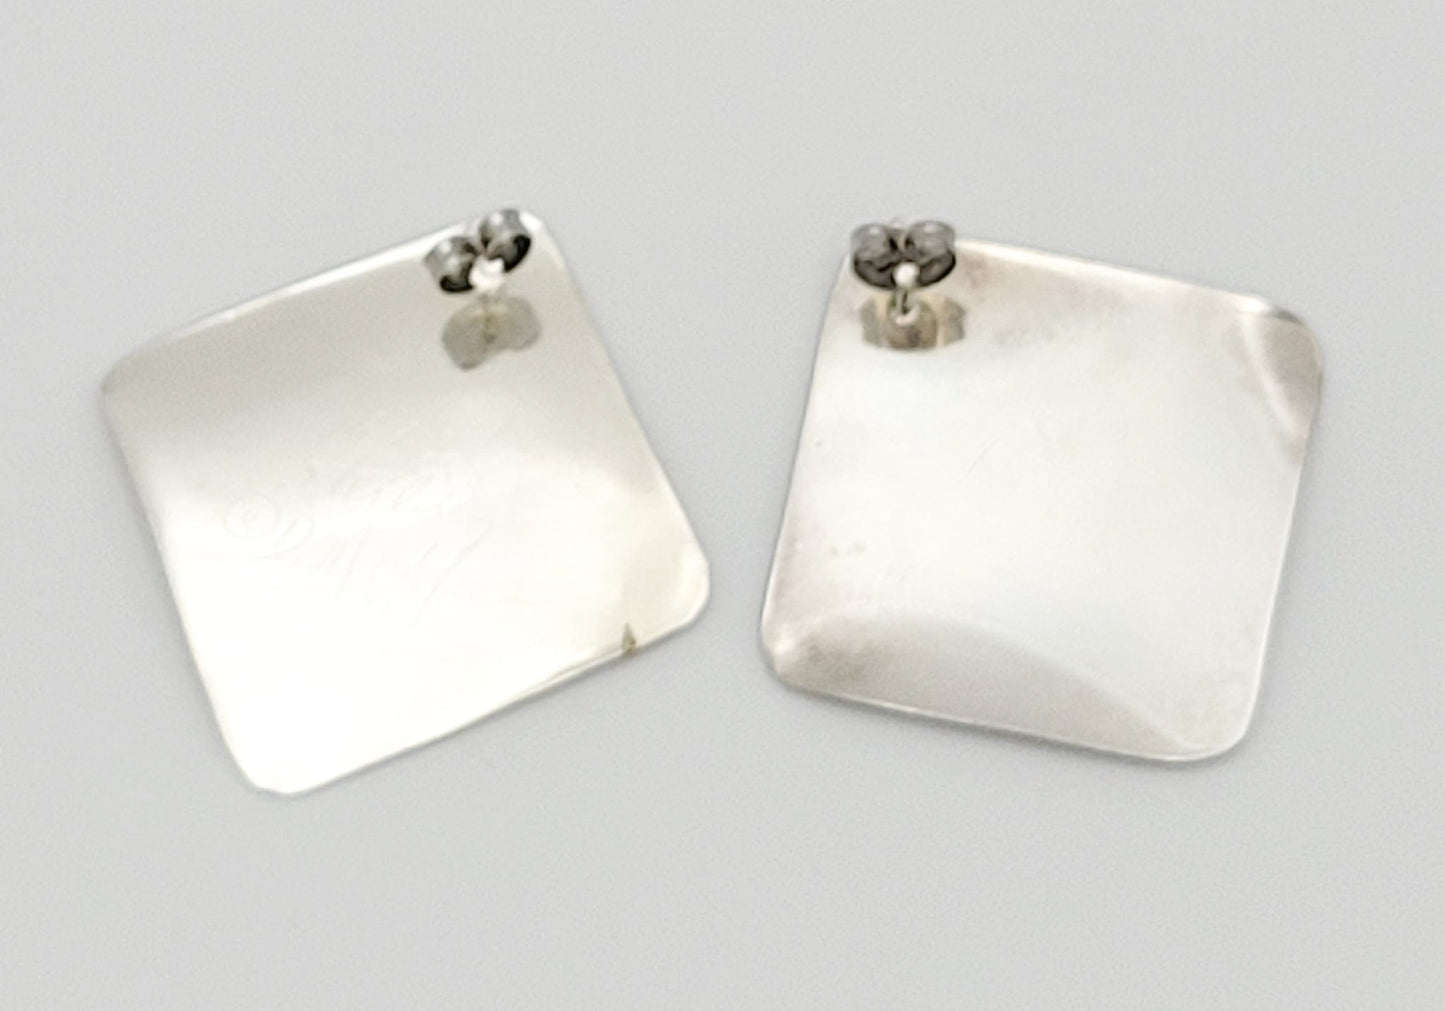 Donna McAfee Jewelry Artisan Donna McAfee Sterling Silver Abstract Modernist #88 Earrings 1992